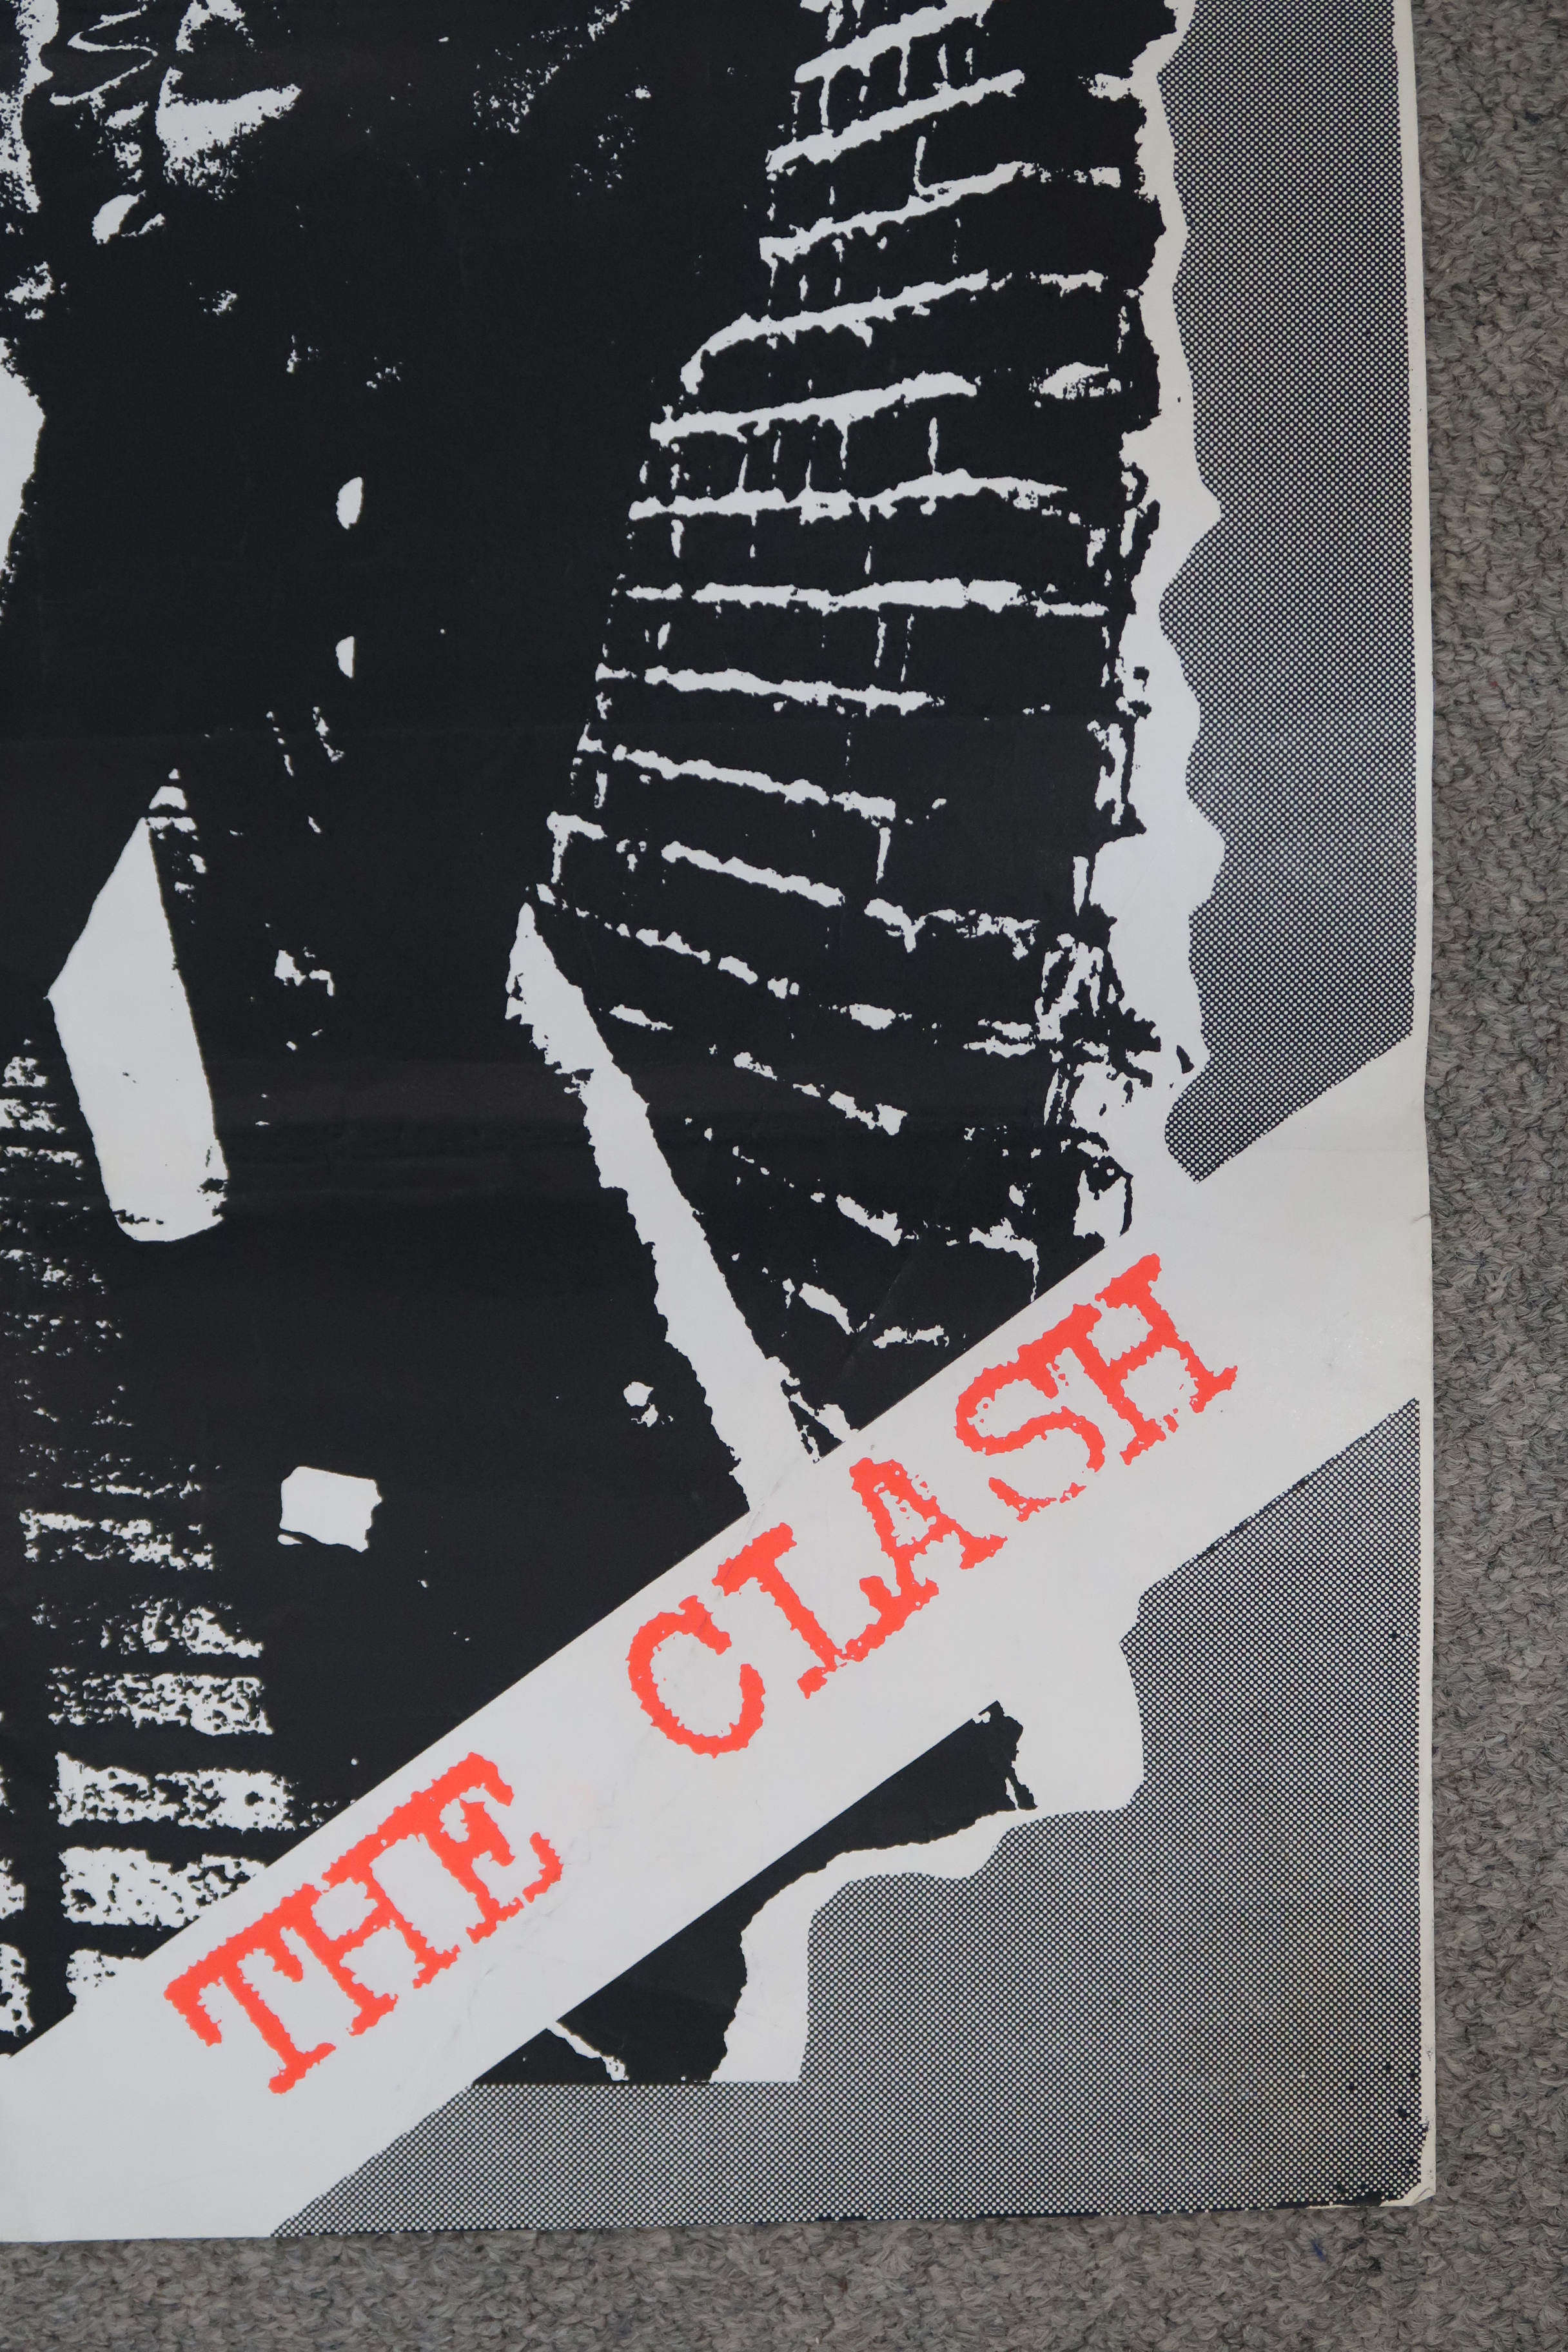 The Clash a Clash poster from their debut album with Paul Simonon, Joe Strummer and Mick Jones - Image 11 of 12